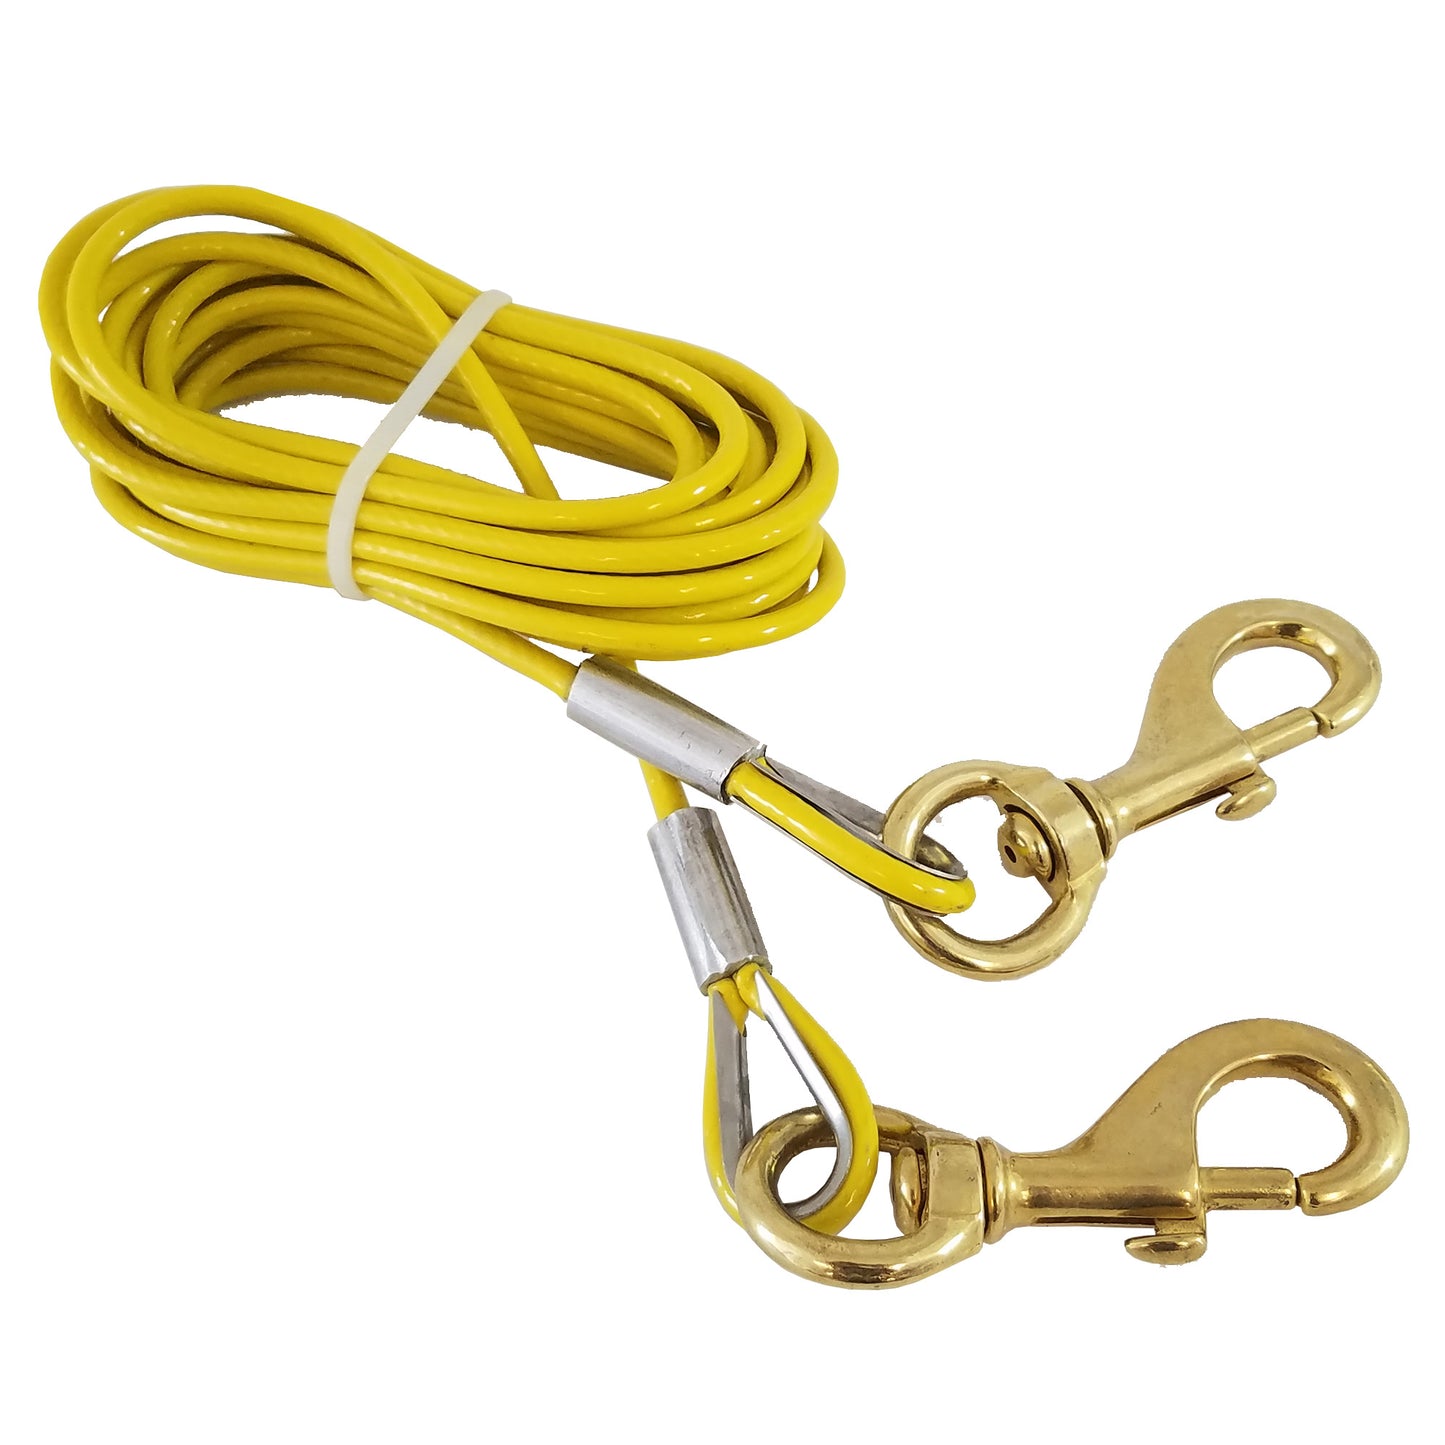 Premium quality dog run cable made in the USA